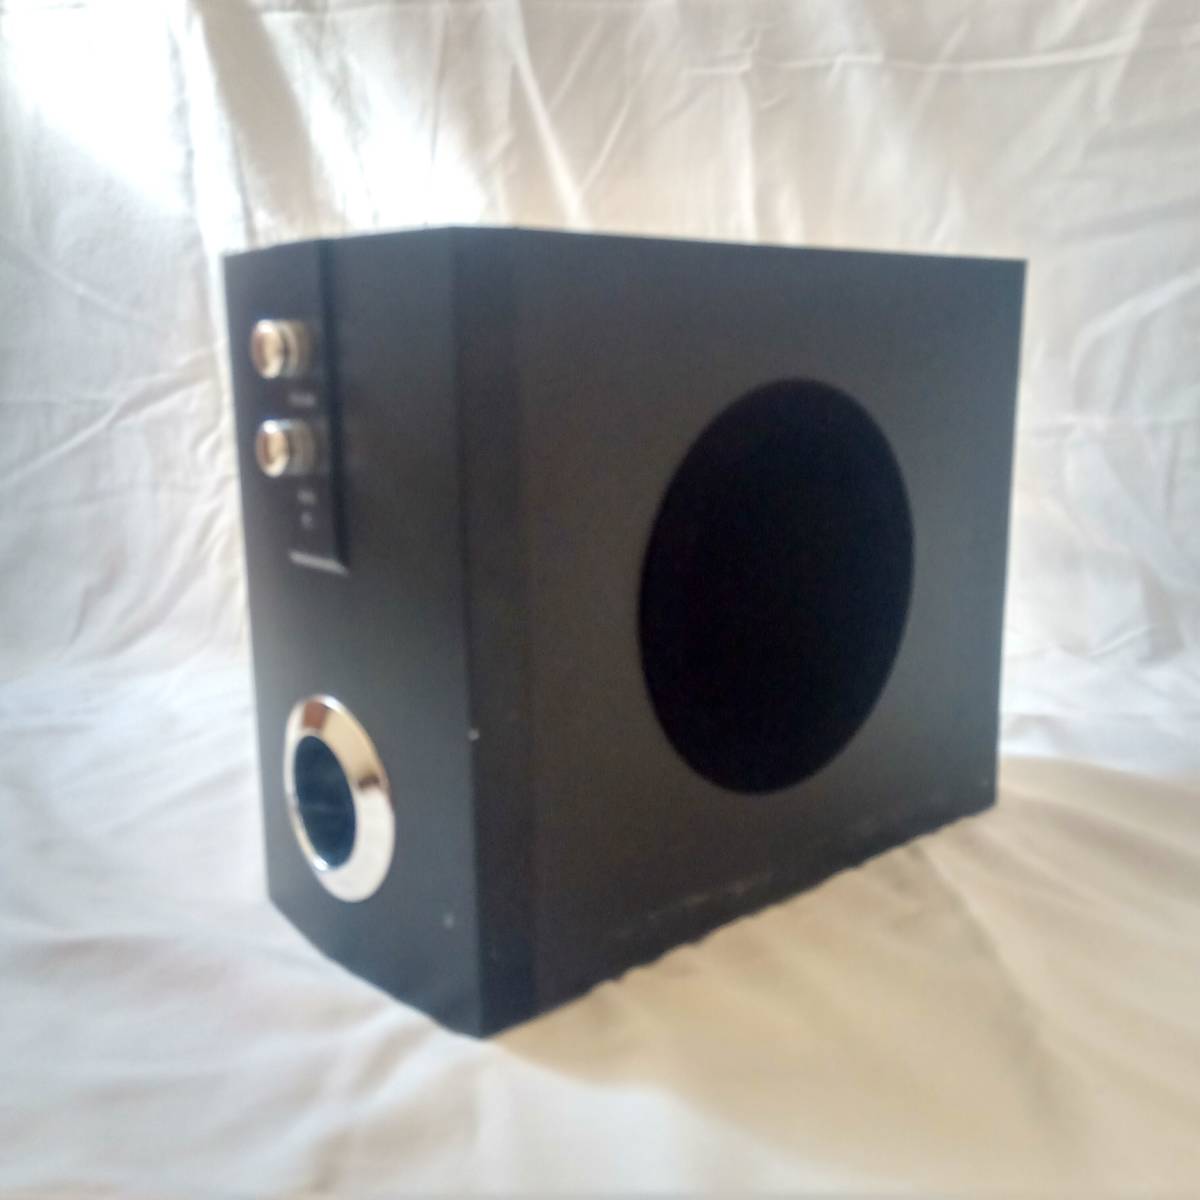  speaker system Surround amplifier built-in smartphone . just this possible to use! subwoofer woofer 